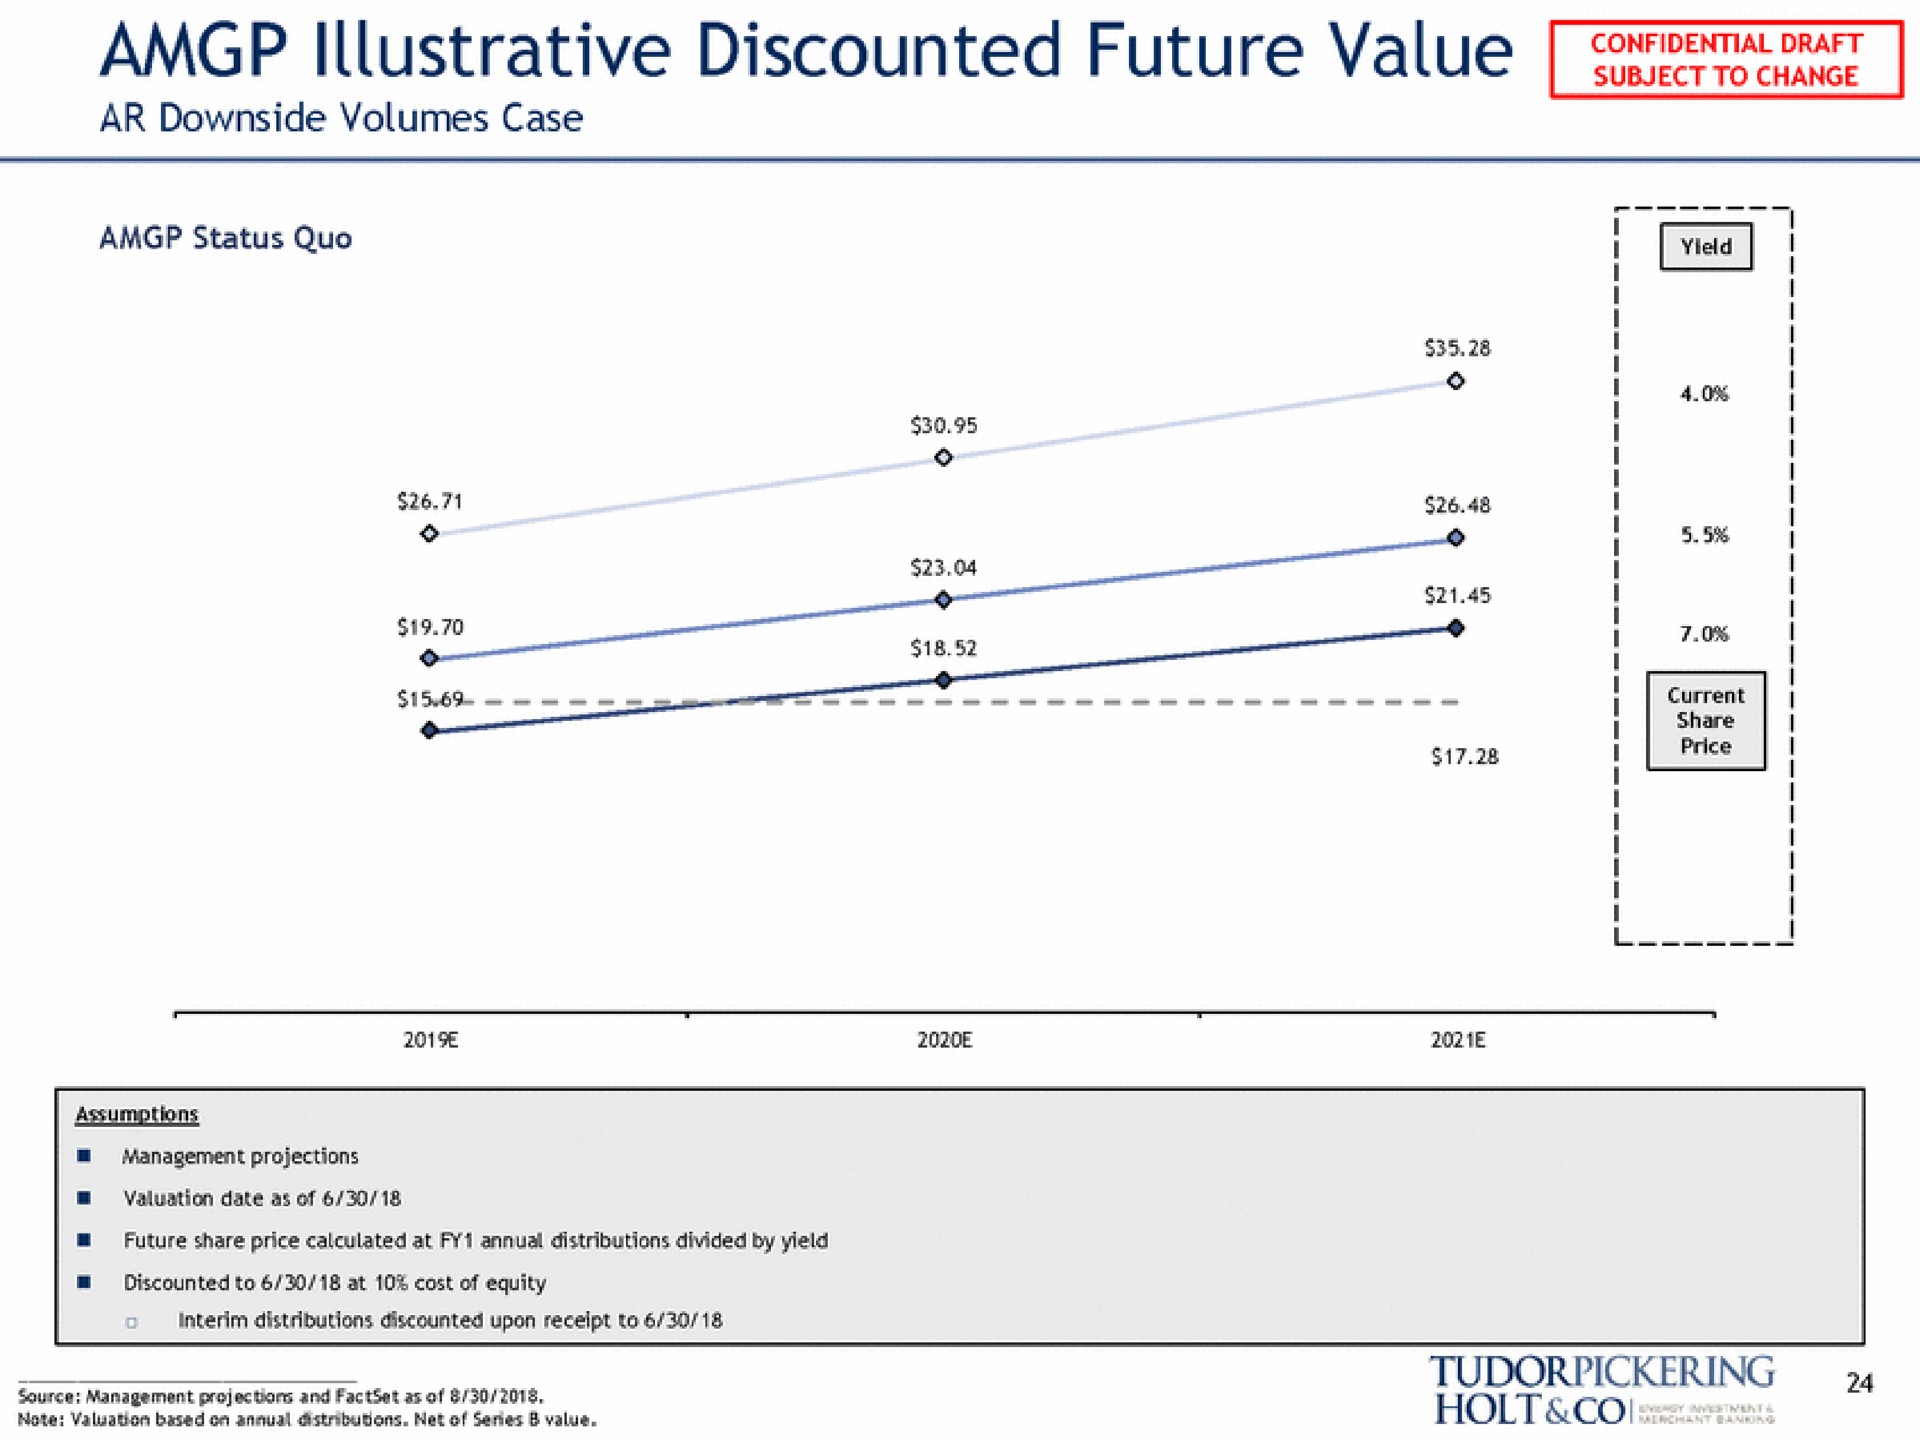 illustrative discounted future value purr source management projectors and as of | Tudor, Pickering, Holt & Co